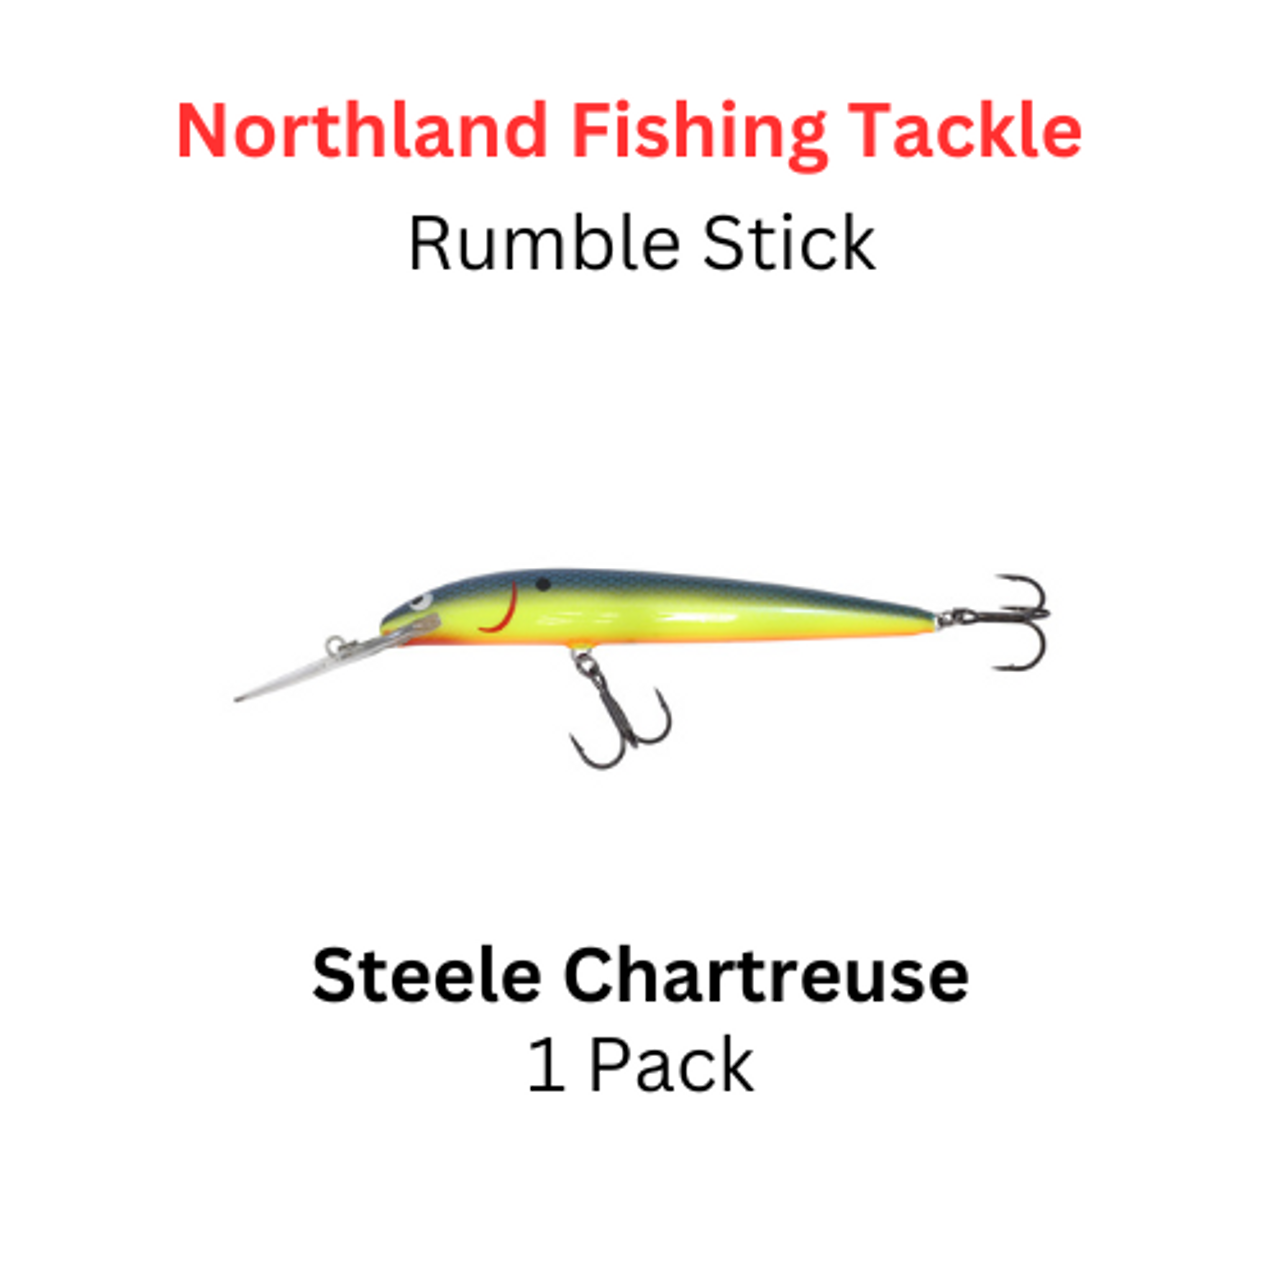 https://cdn11.bigcommerce.com/s-u9nbd/images/stencil/1280x1280/products/6309/15907/Northland_Fishing_Tackle_Rumble_Stick_Steele_Chartreuse__04582.1677007697.png?c=2?imbypass=on